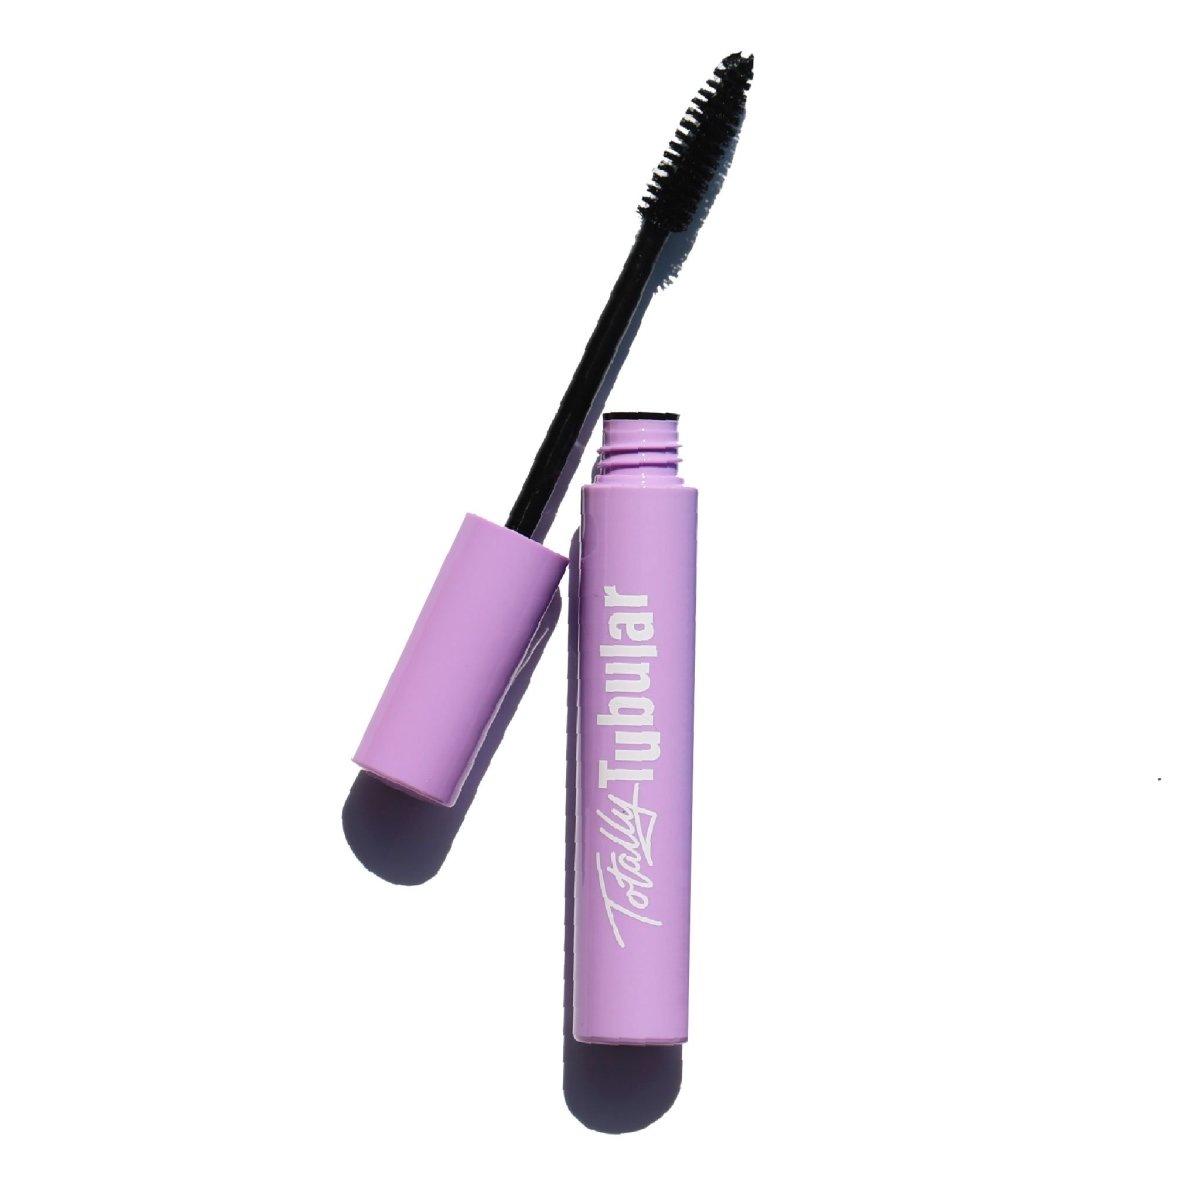 open purple mascara tube with black wire bushy applicator - totally tubular mascara, the realest - half caked makeup